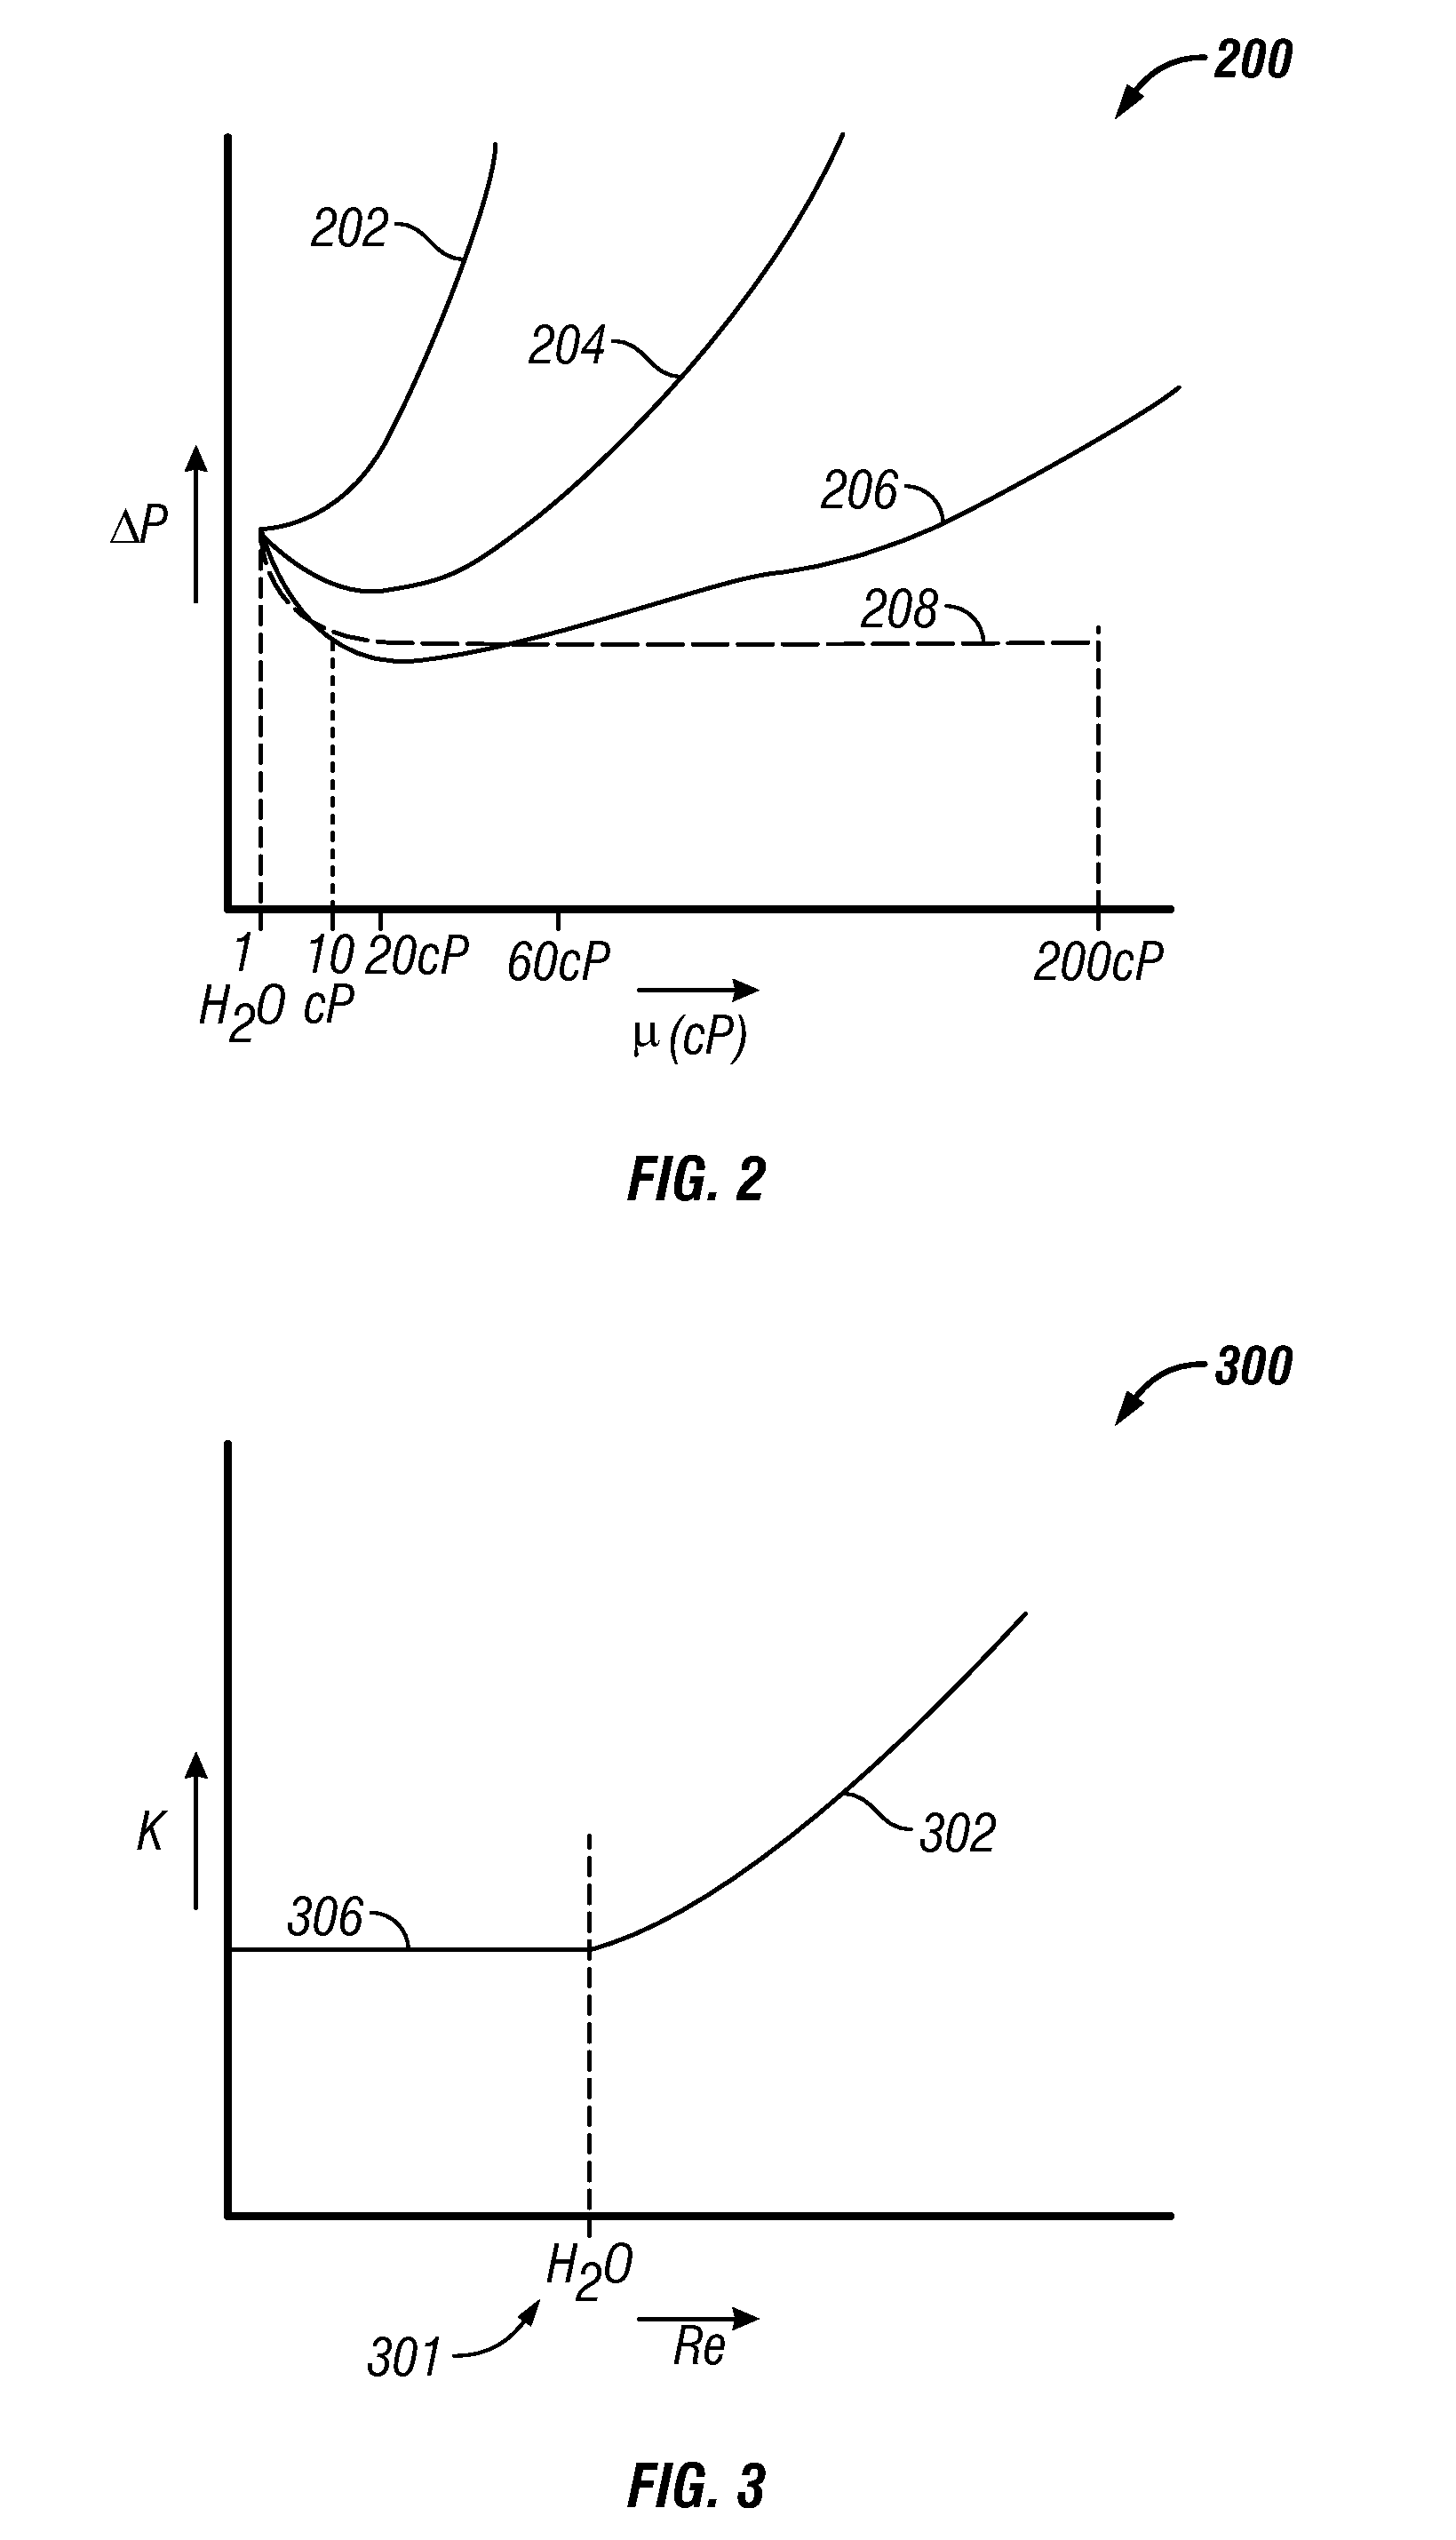 Method of Making a Flow Control Device That Reduces Flow of the Fluid When a Selected Property of the Fluid is in Selected Range